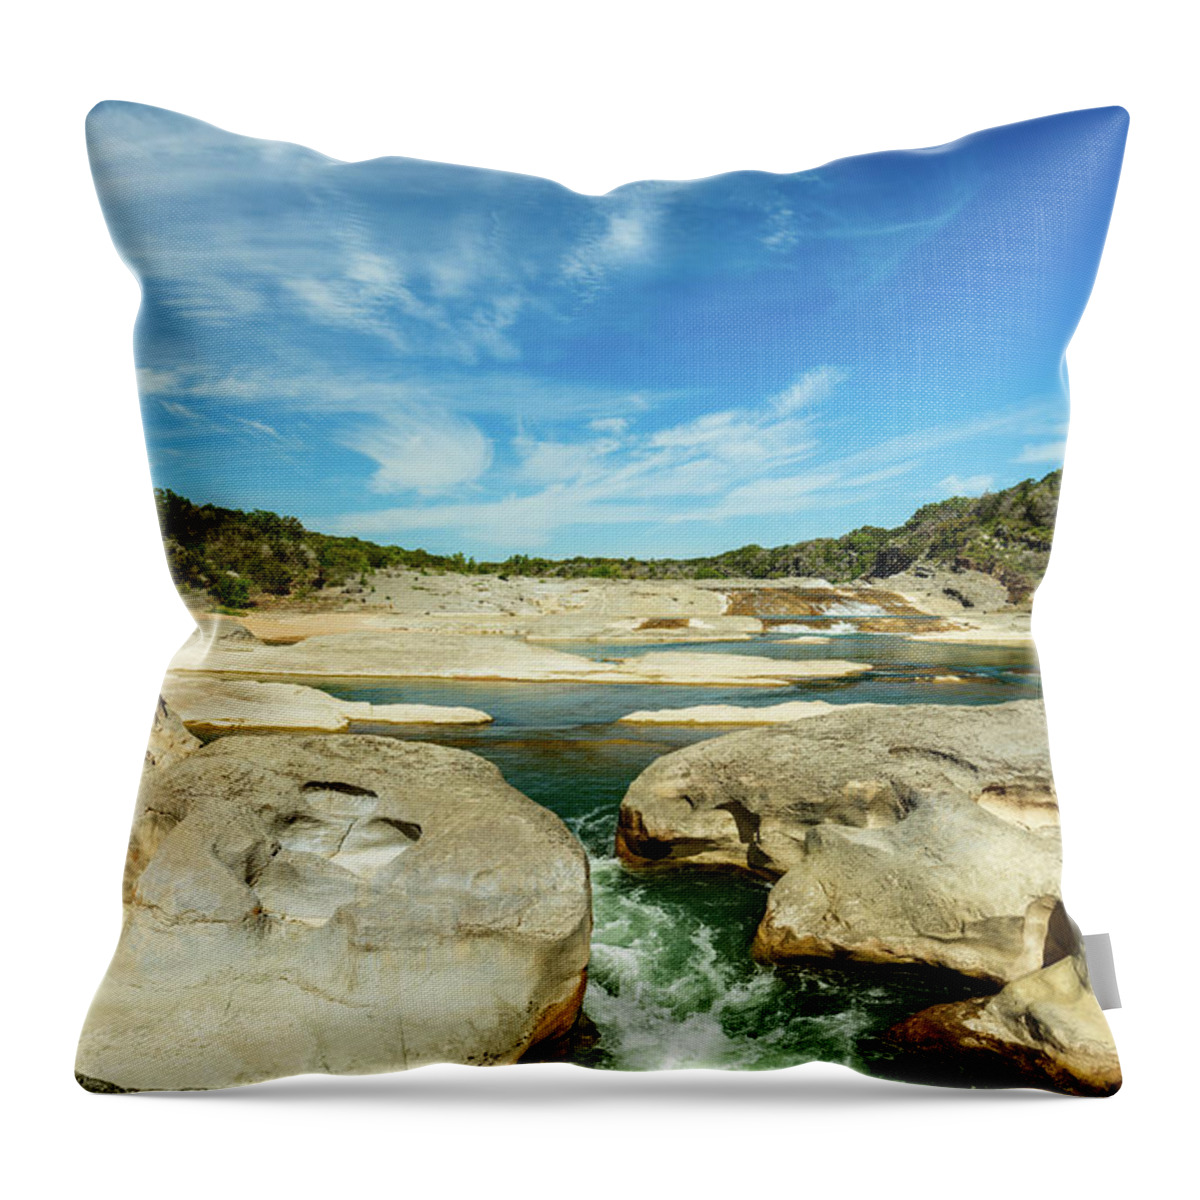 Pedernales Falls Throw Pillow featuring the photograph Pedernales Falls Texas by Raul Rodriguez